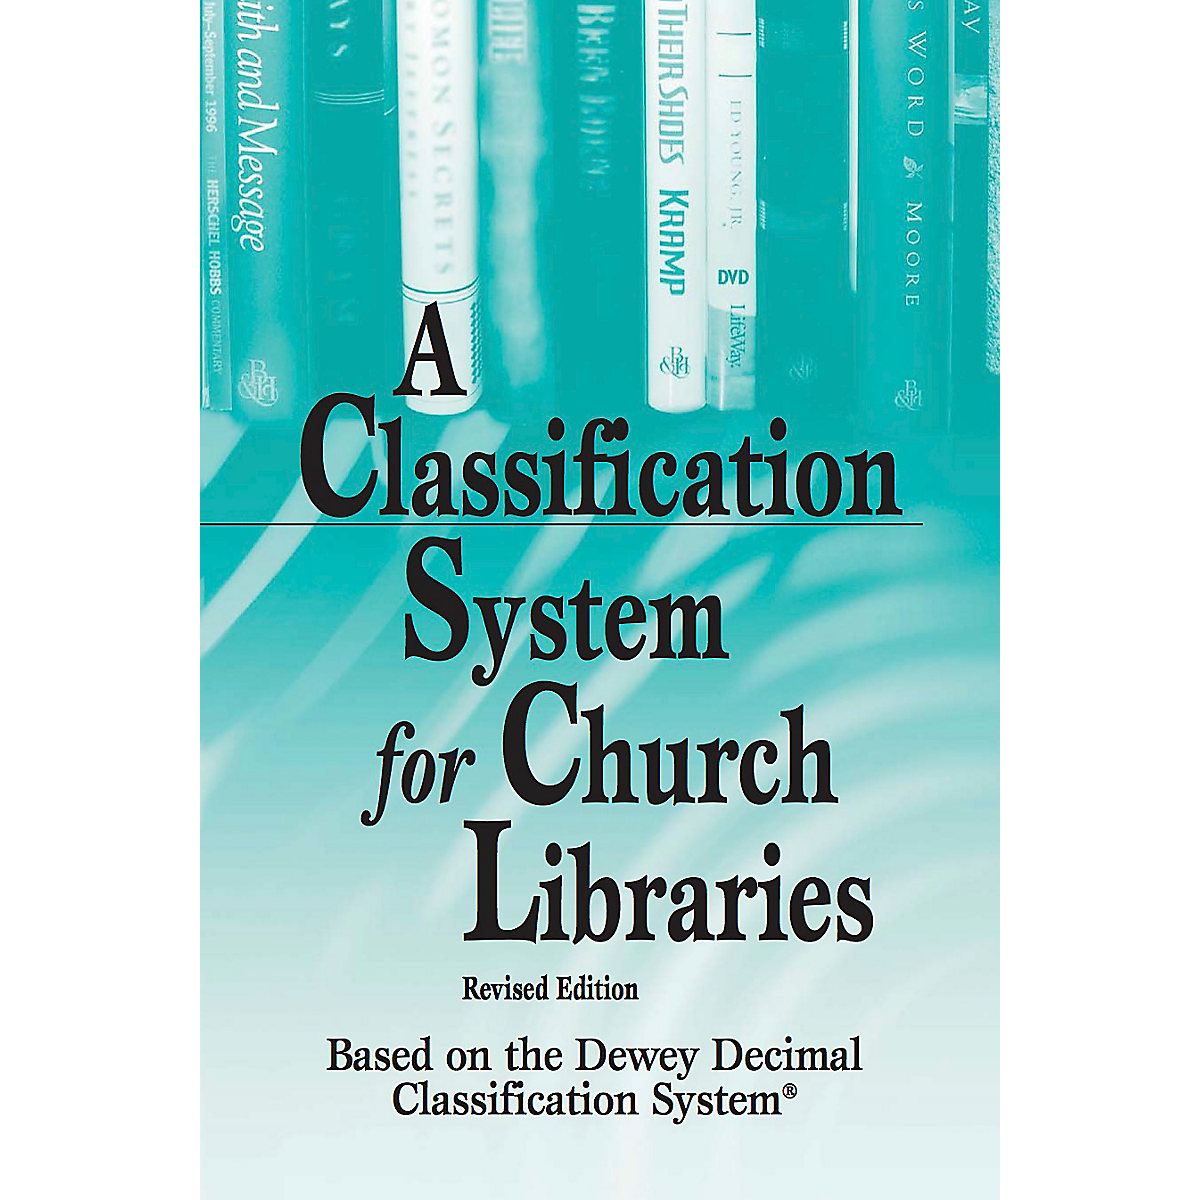 A Classification System for Church Libraries, Revised